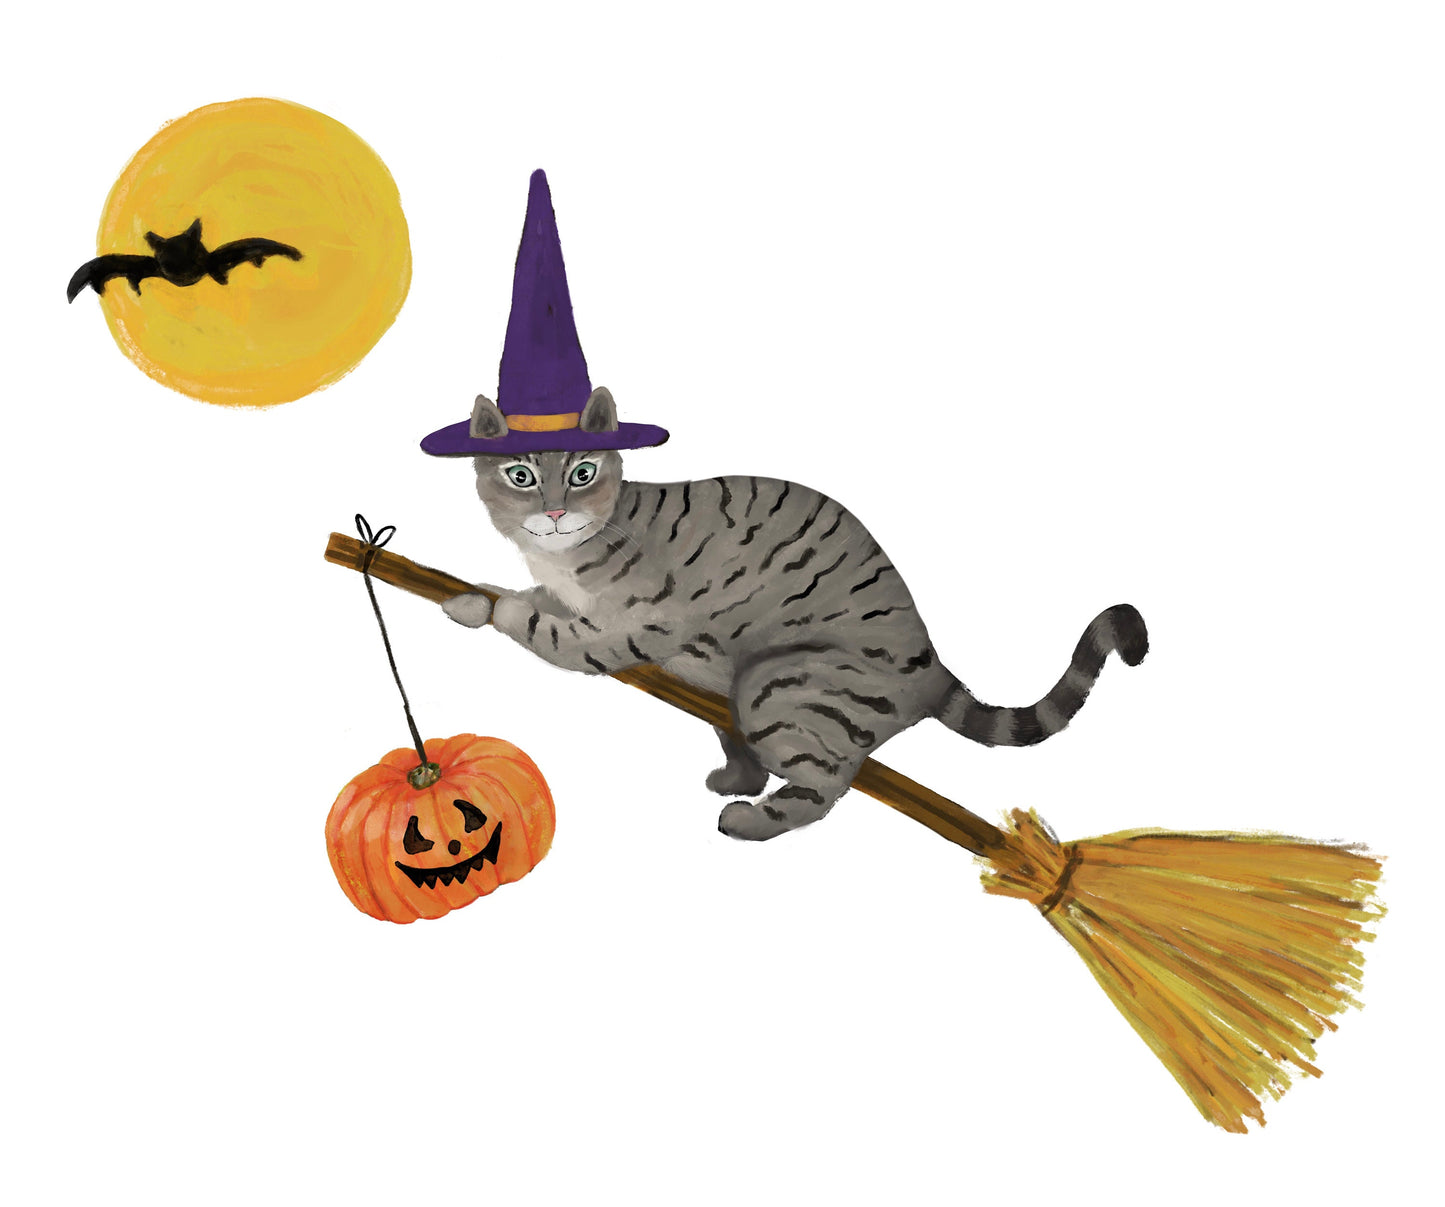 Gray Tabby Cat Flying with a Broom Print, Halloween Cat Painting, Orange Tabby Cat Portrait, Holiday Wall Art, Gray Cat Flying with Bats